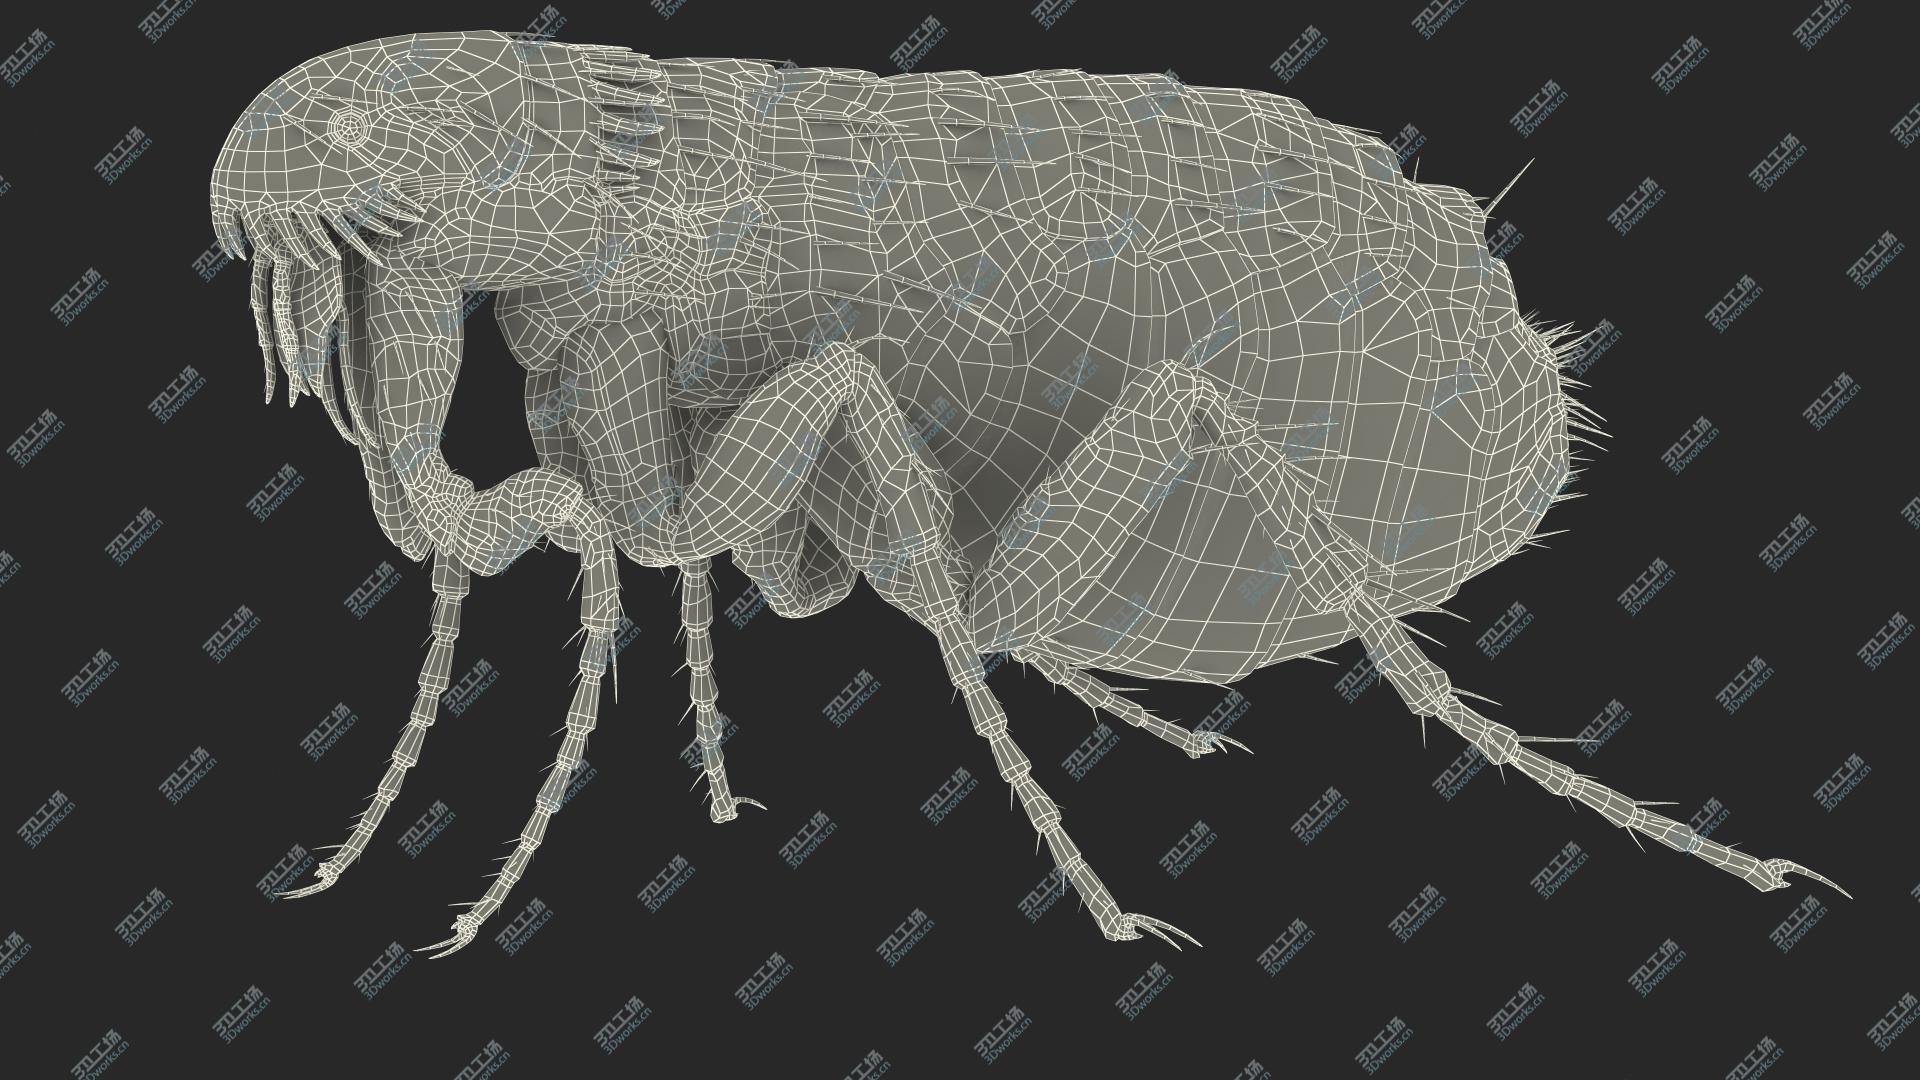 images/goods_img/202104093/3D Flea Insect Rigged model/4.jpg